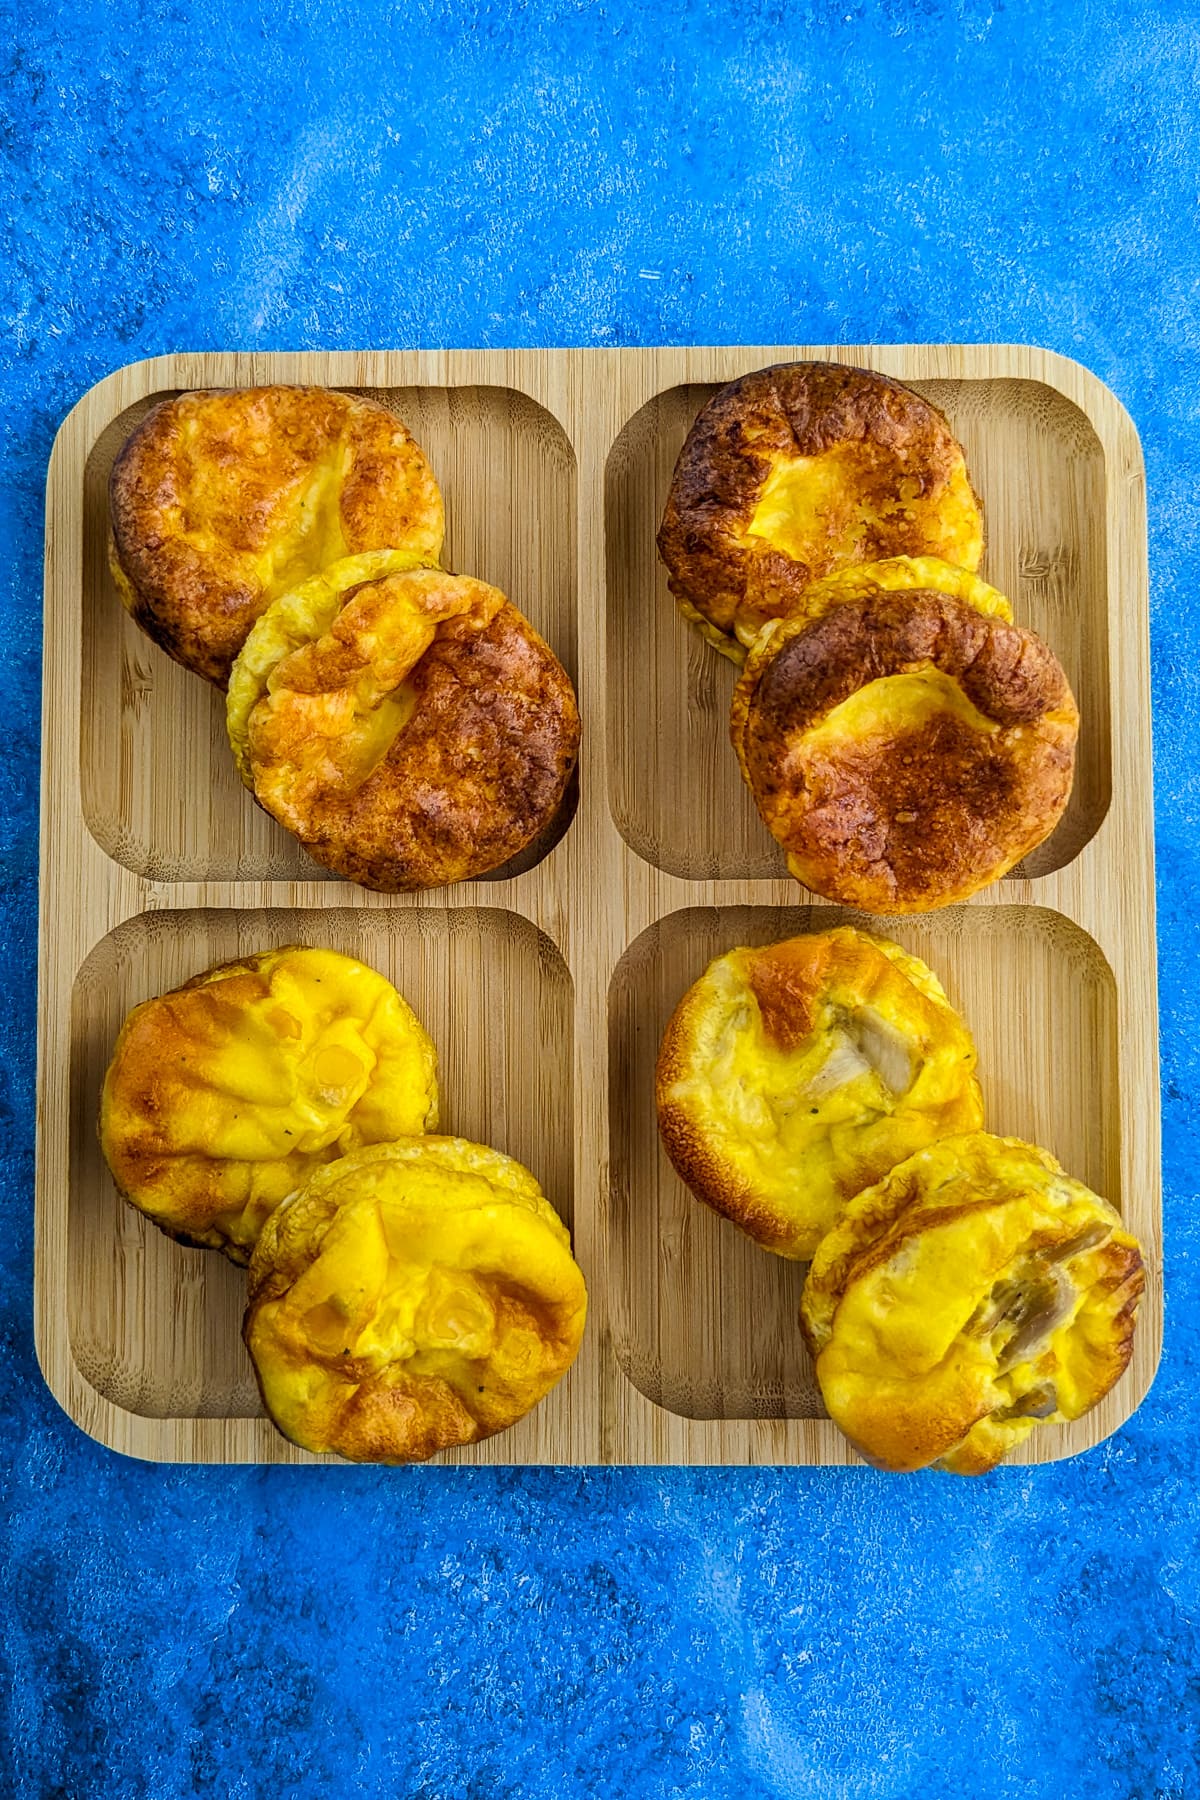 4 variations of egg muffins for kids on a wooden plate.